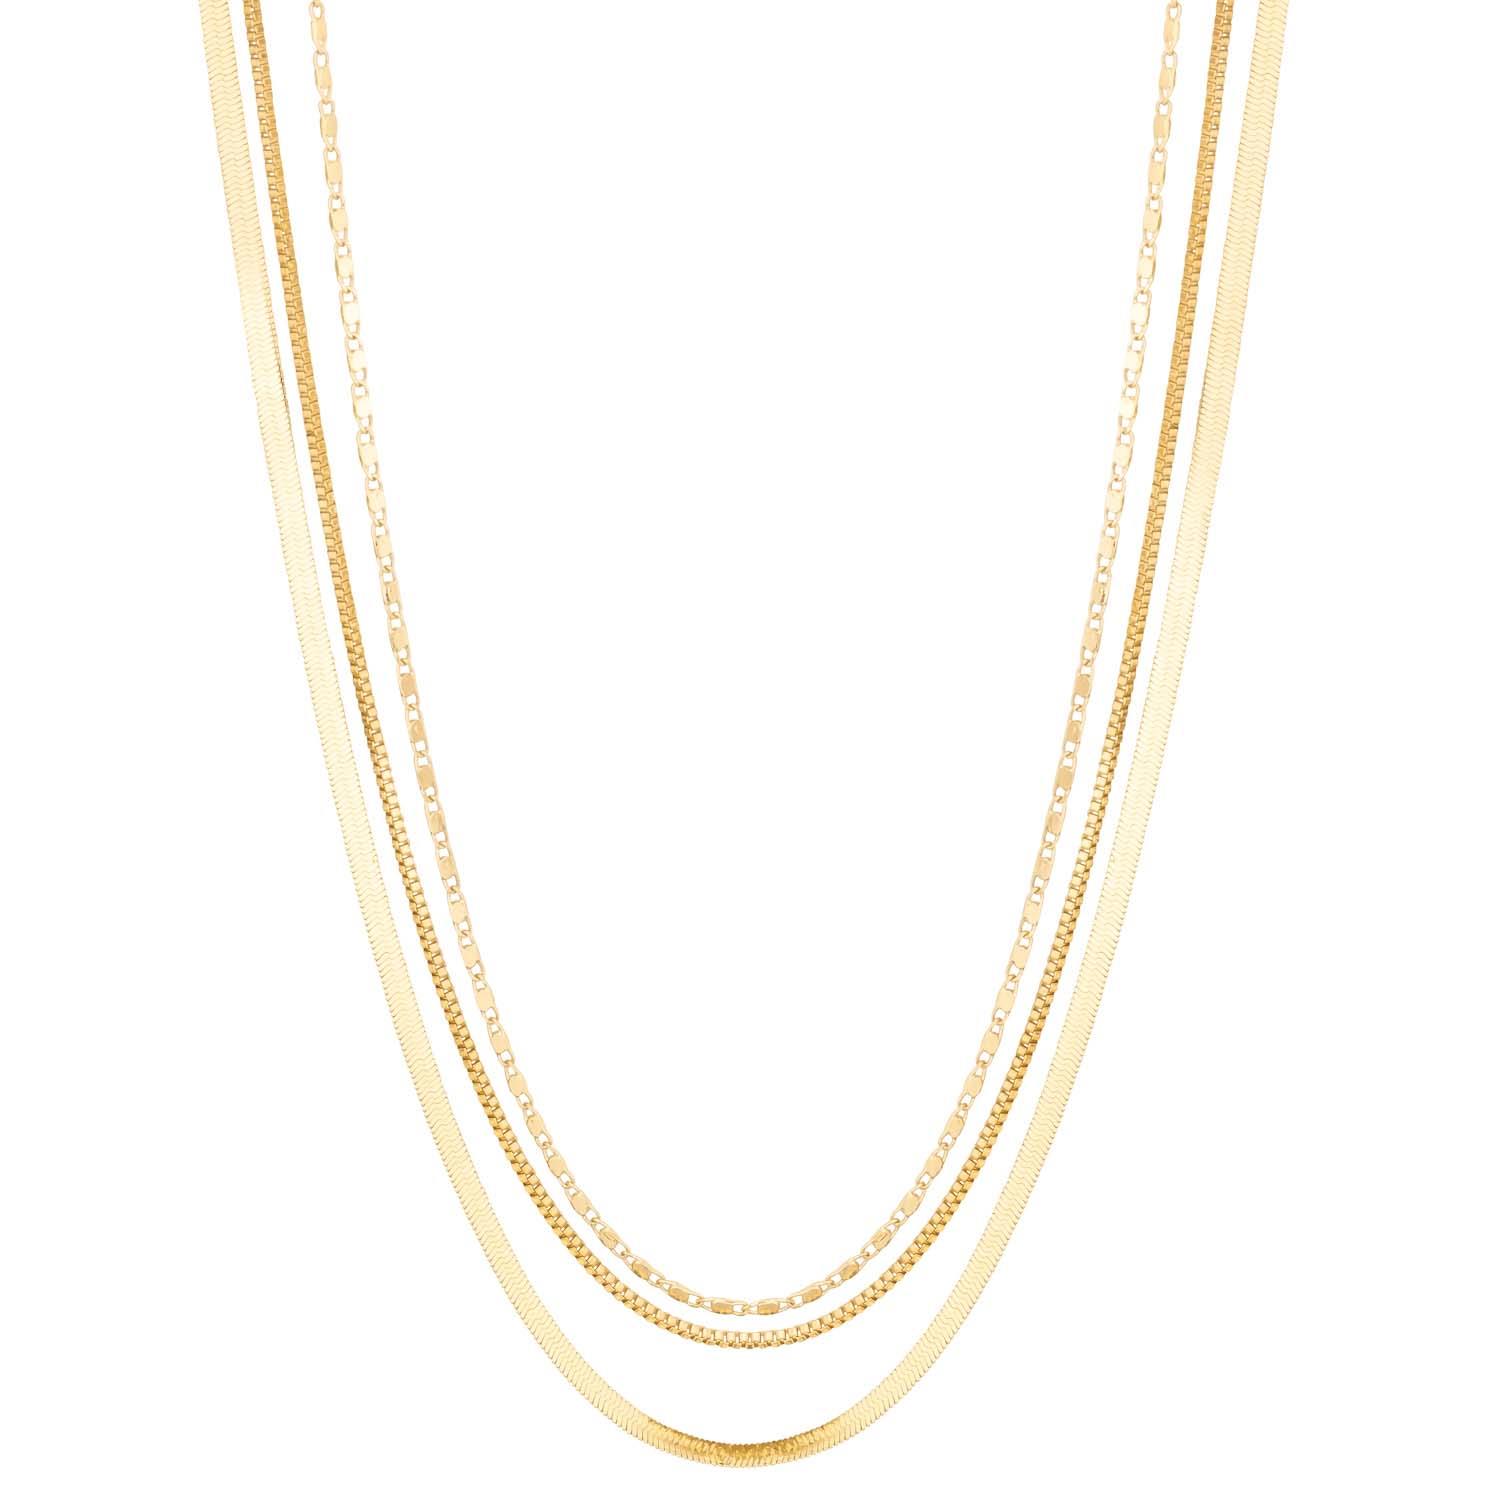 3 LAYERED METAL CHAIN NECKLACE